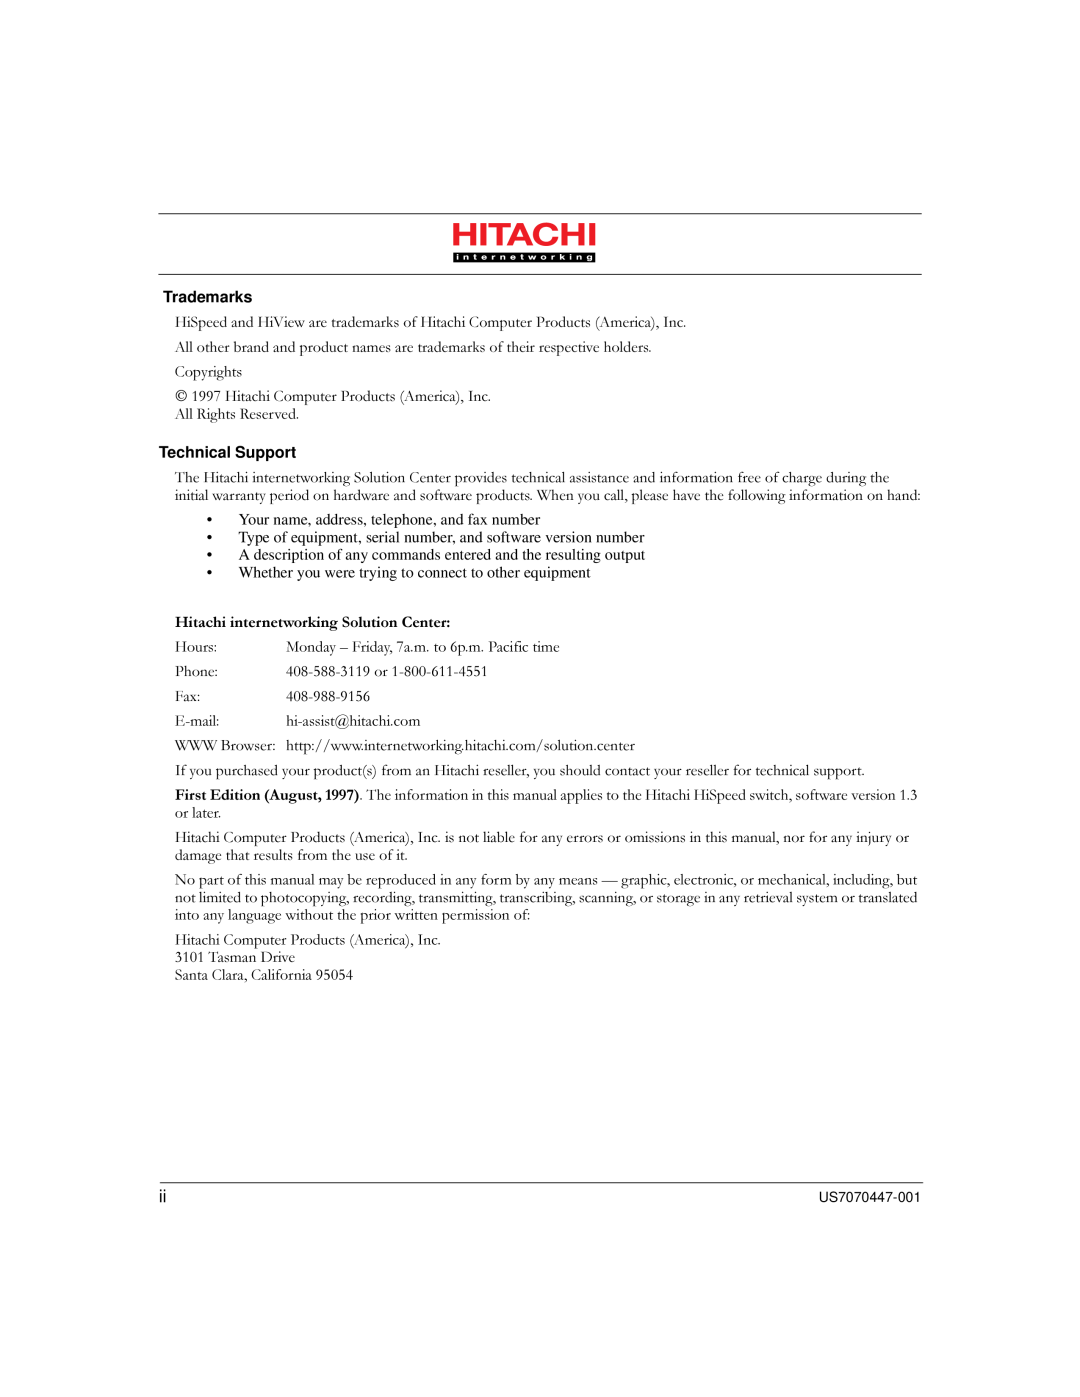 Hitachi US7070447-001 #&$$%, Your name, address, telephone, and fax number, 3#/#, Trademarks, $2/2, Technical!Support 